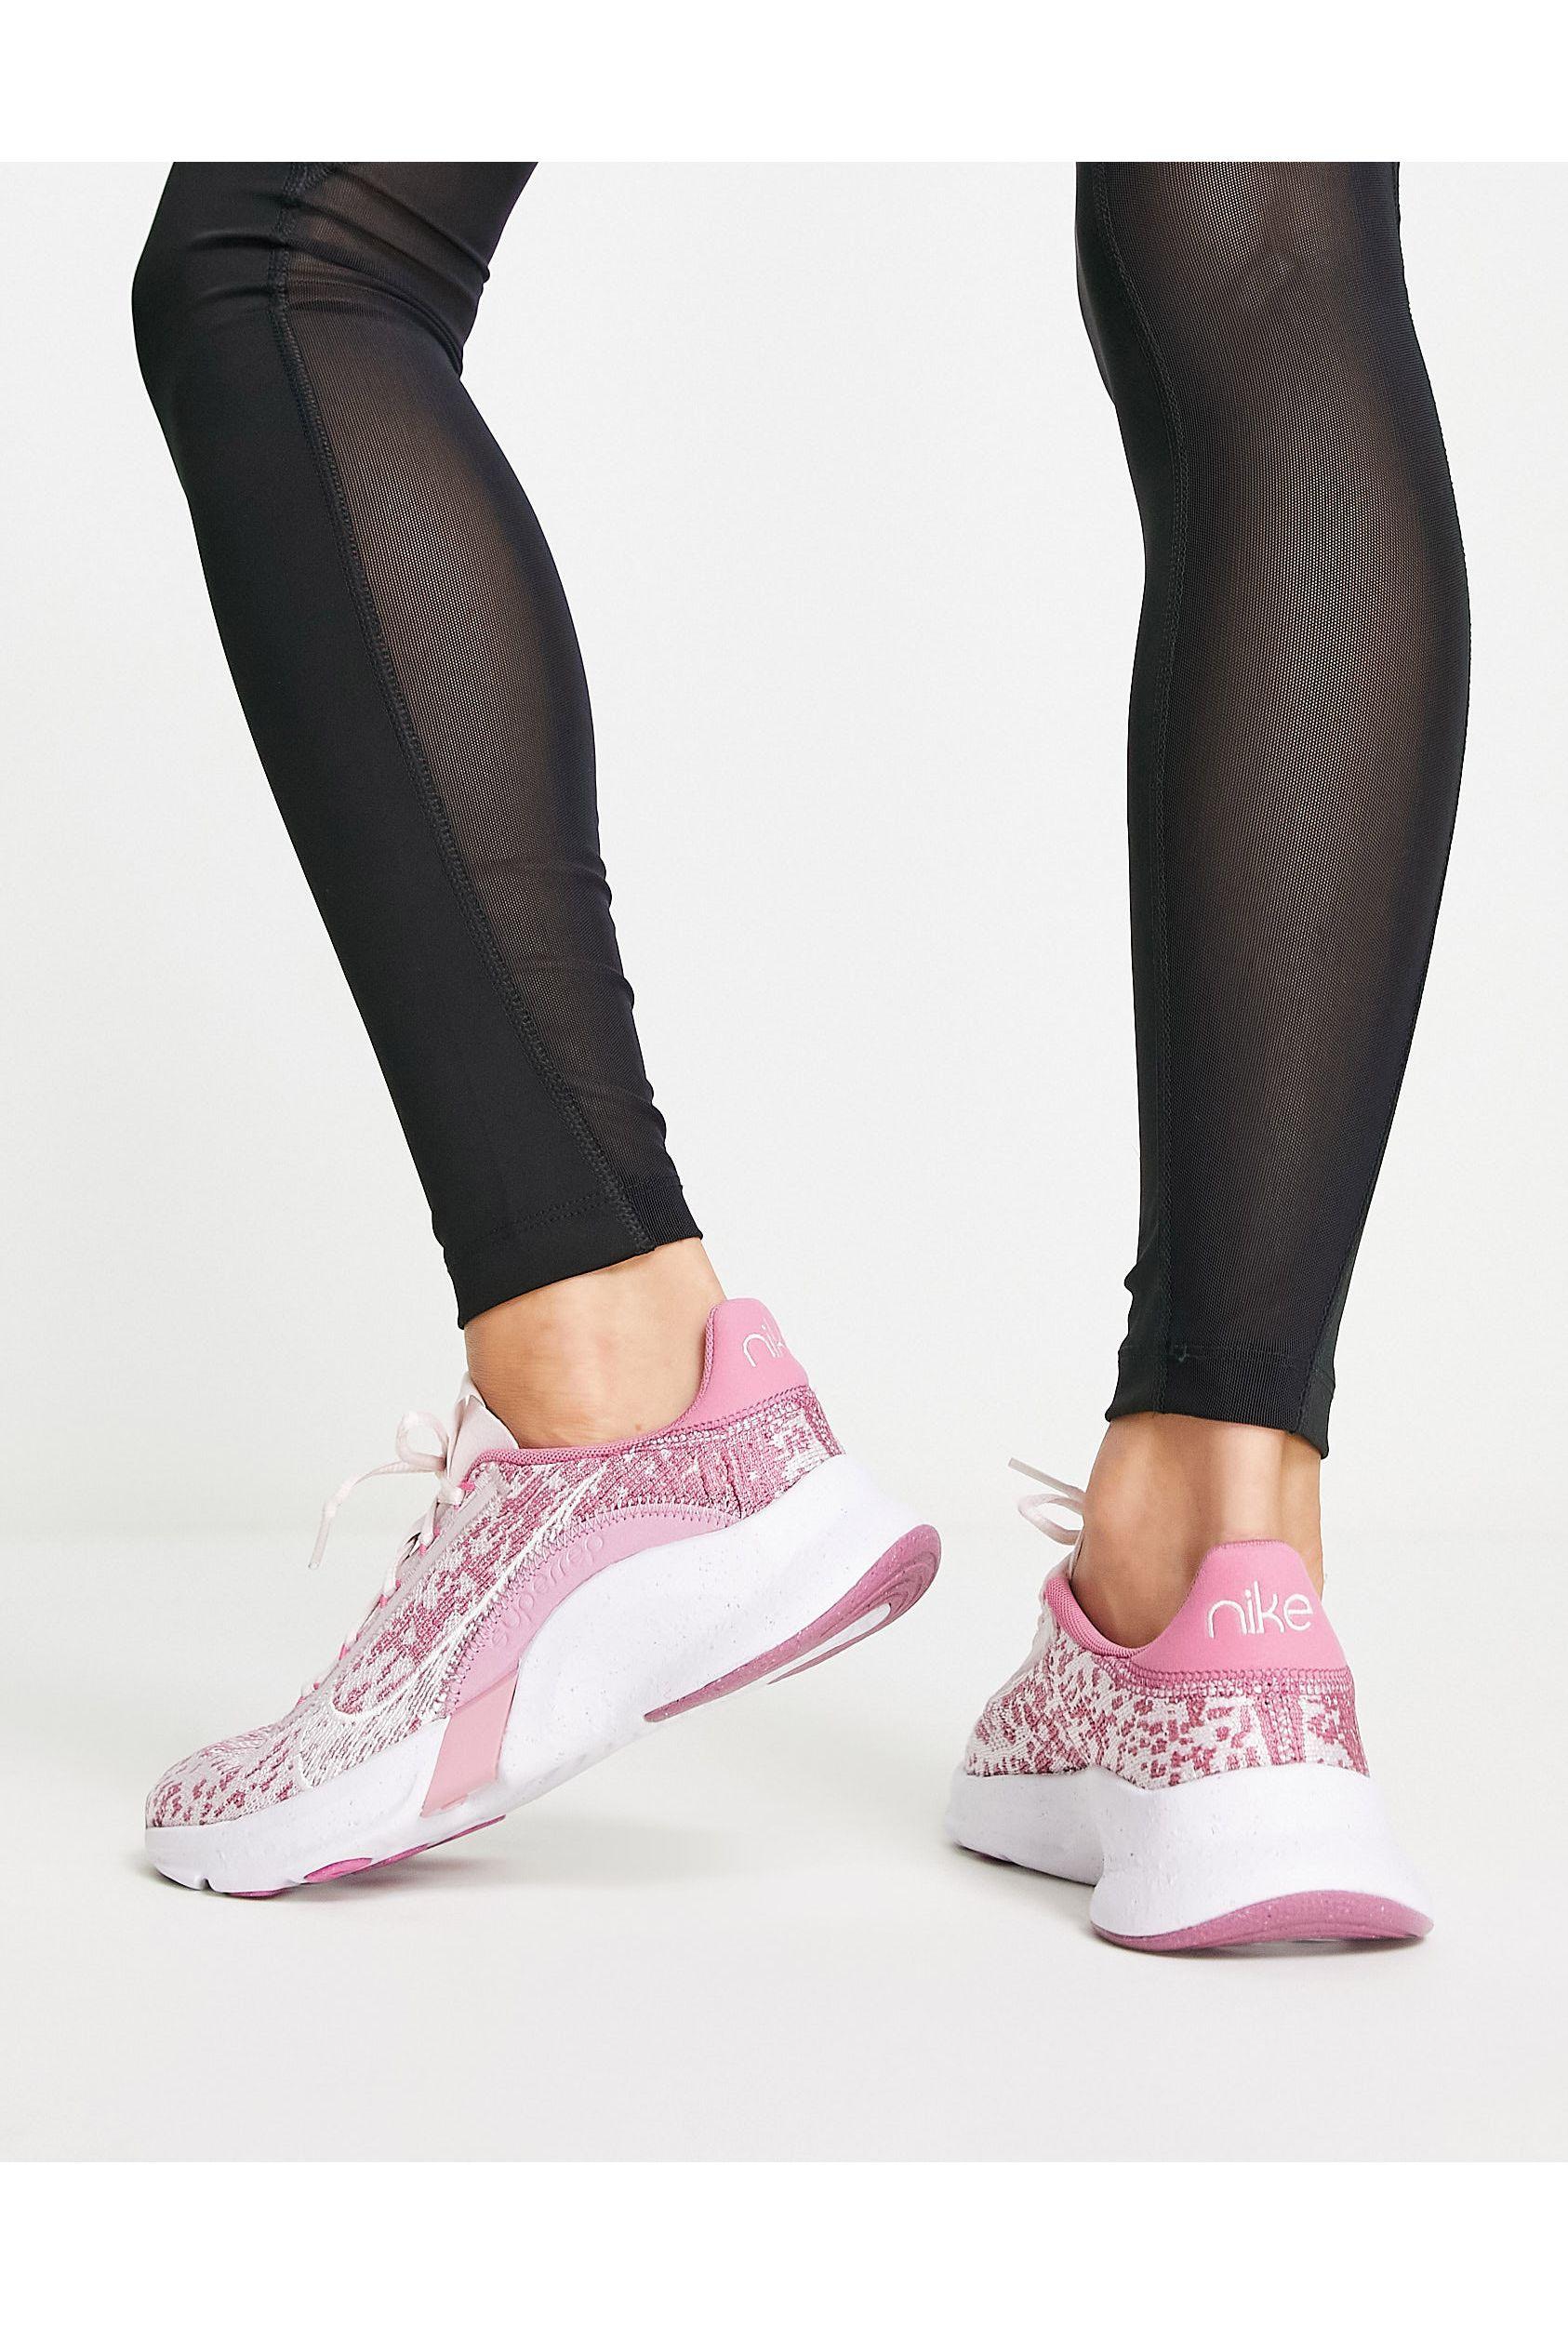 Nike Superrep Go 3 Flyknit Trainers in Pink | Lyst